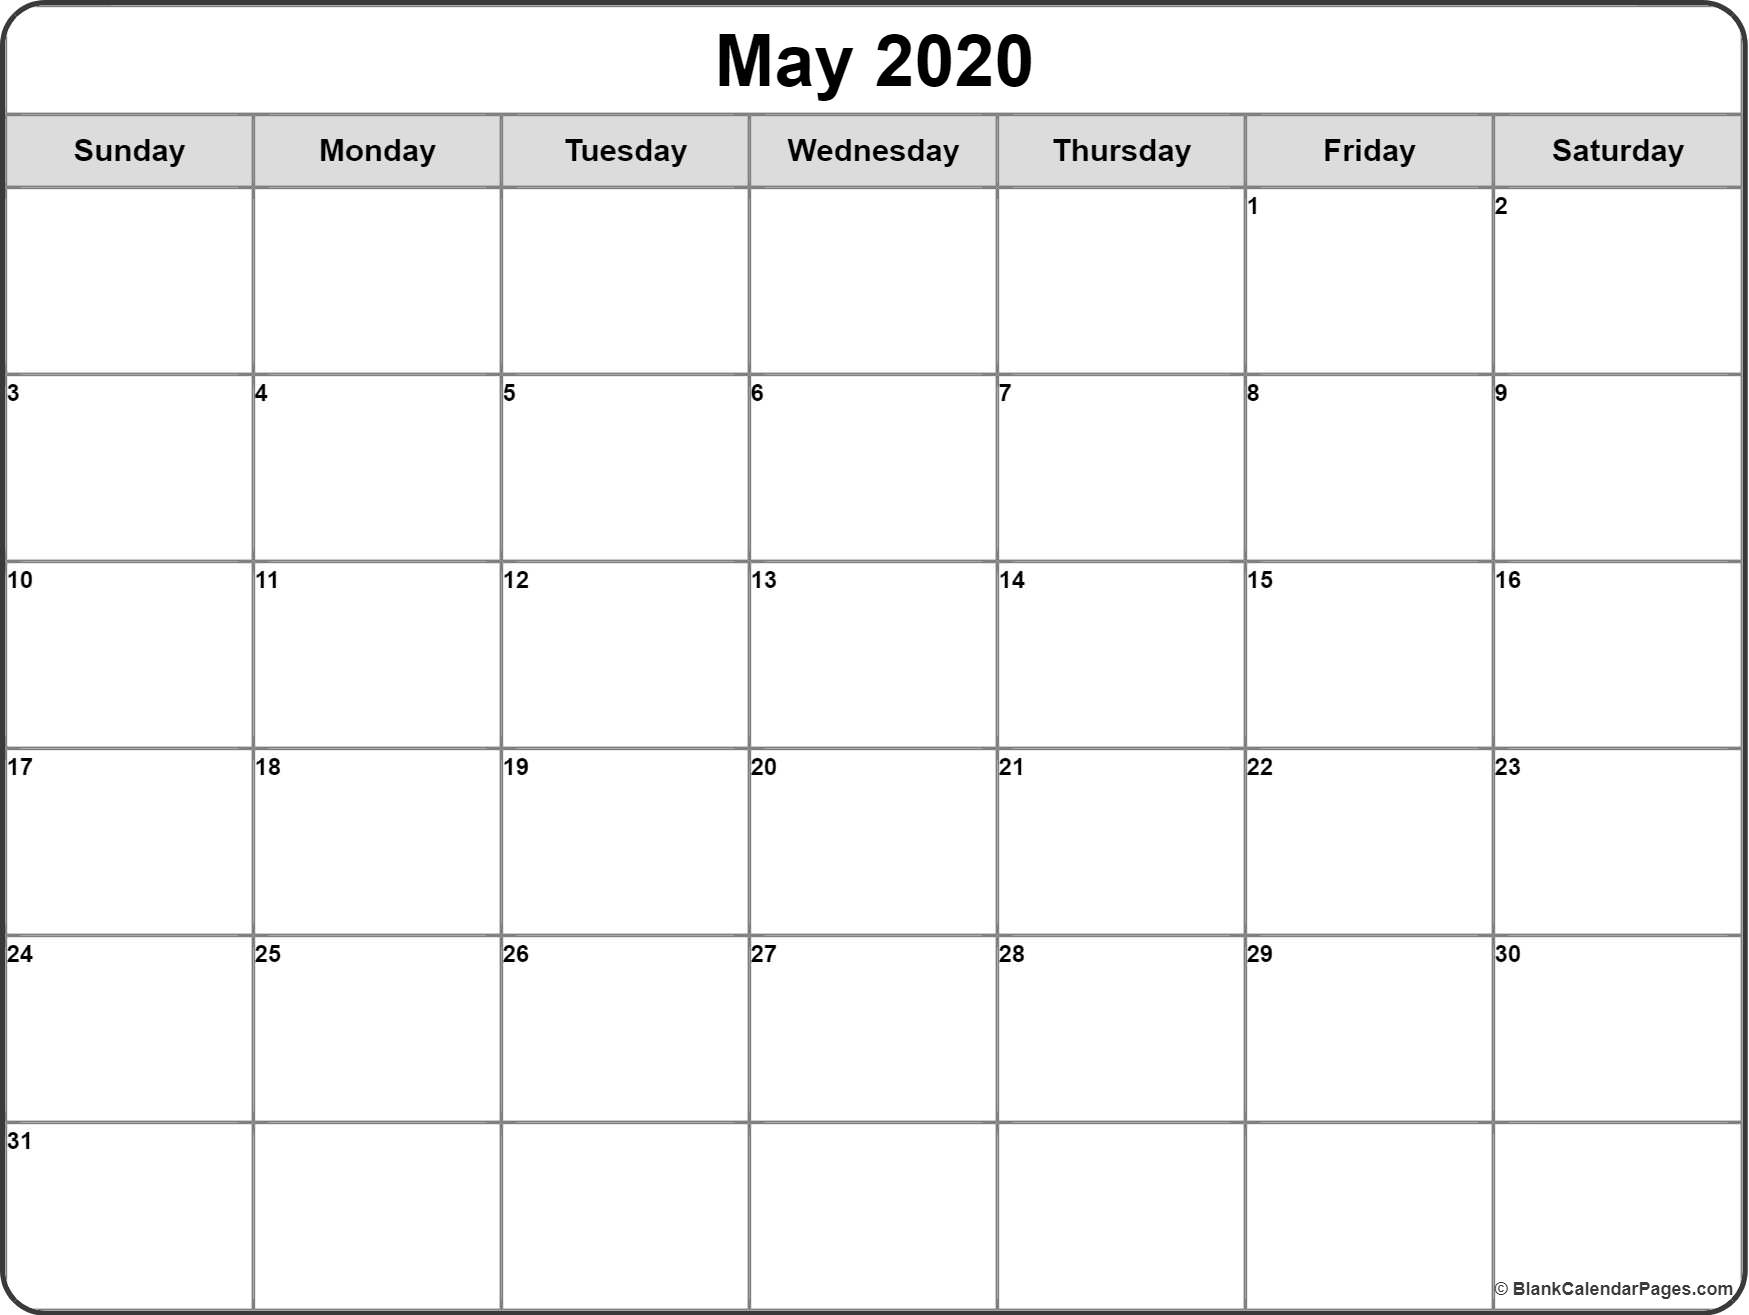 Free Printable Monthly Calendar Templates 2020 - Togo.wpart.co